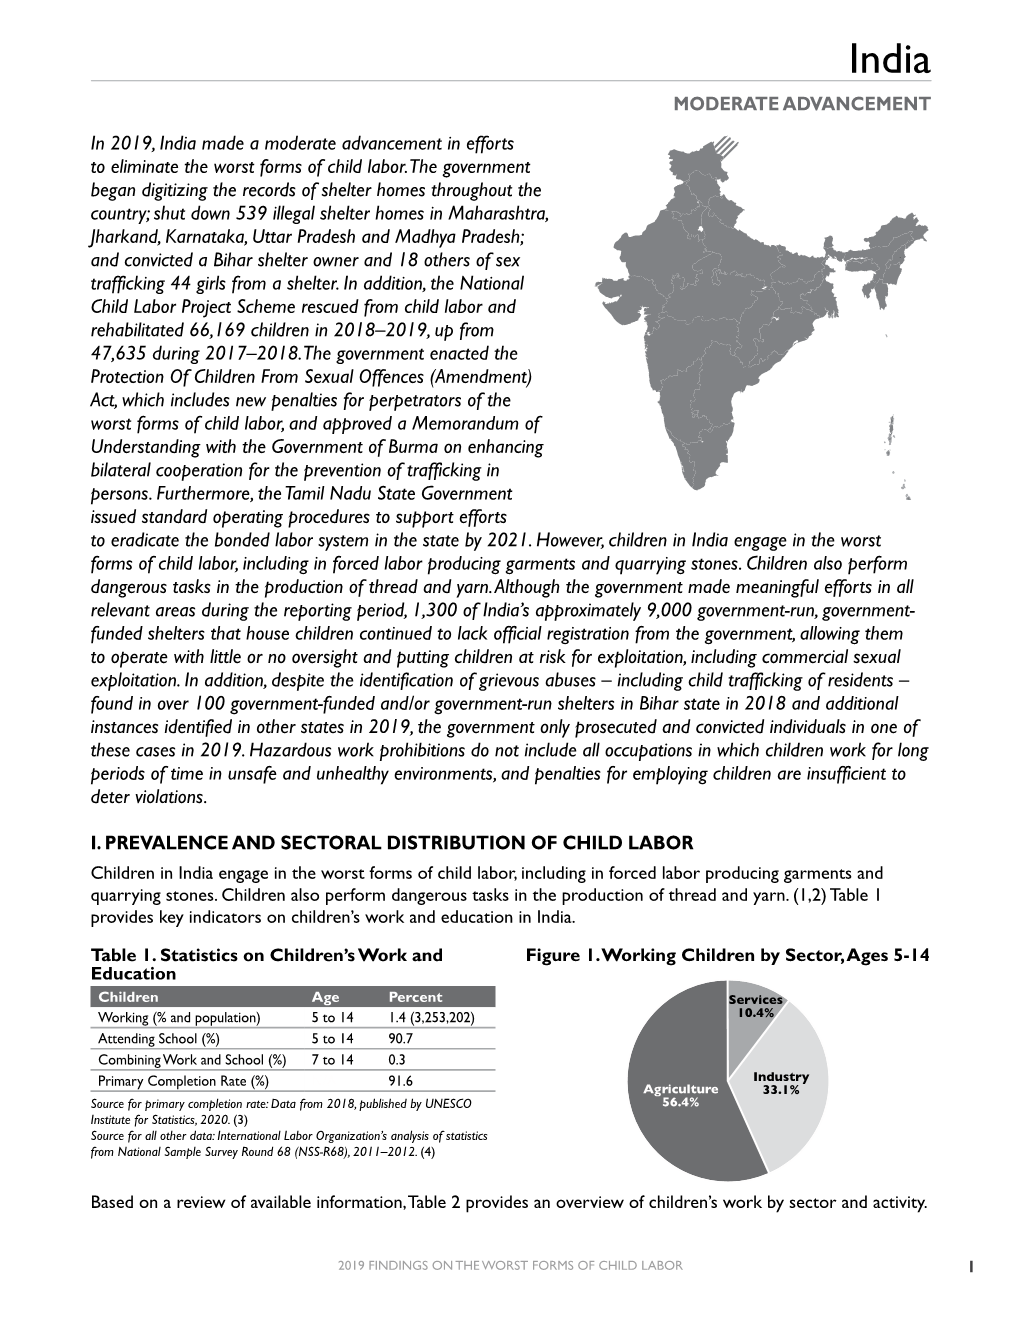 2019 Findings on the Worst Forms of Child Labor: India